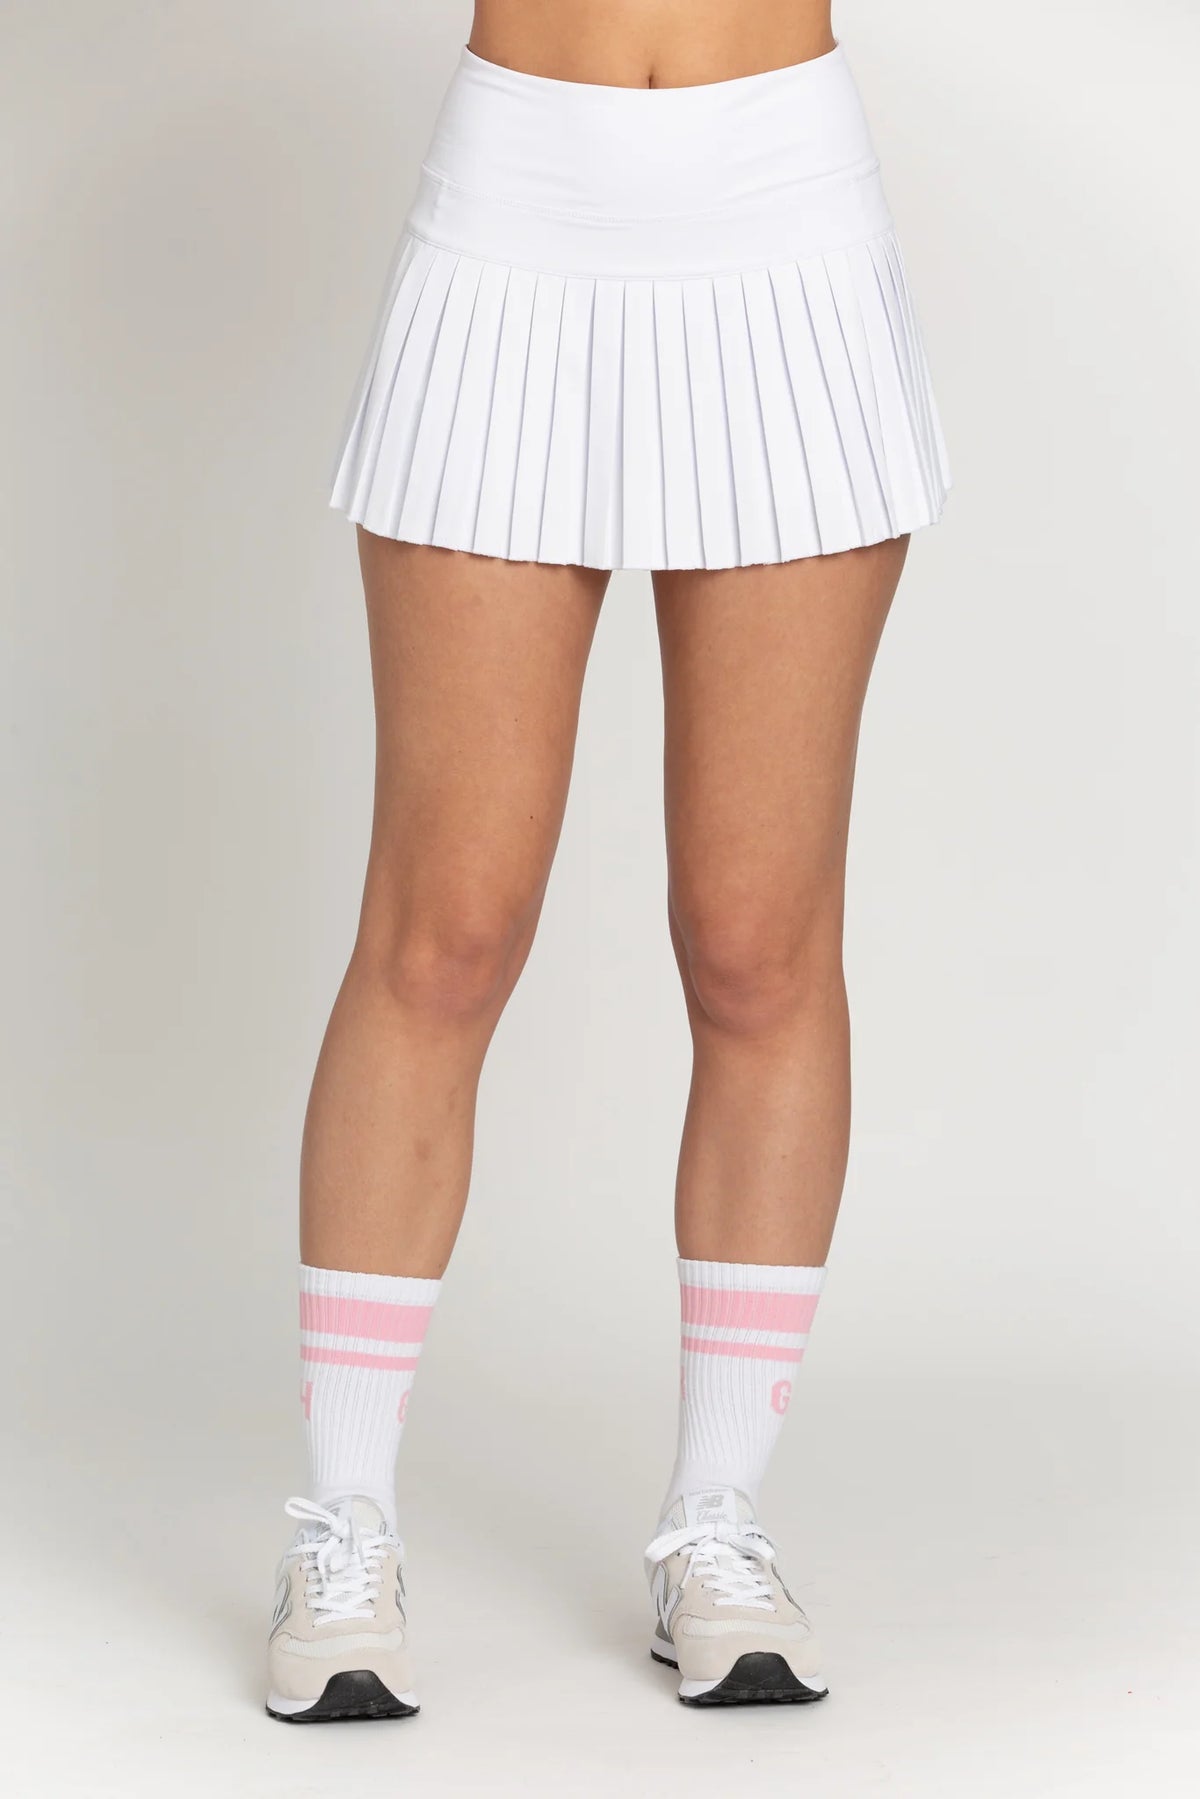 gold hinge pleated tennis skirt in off white